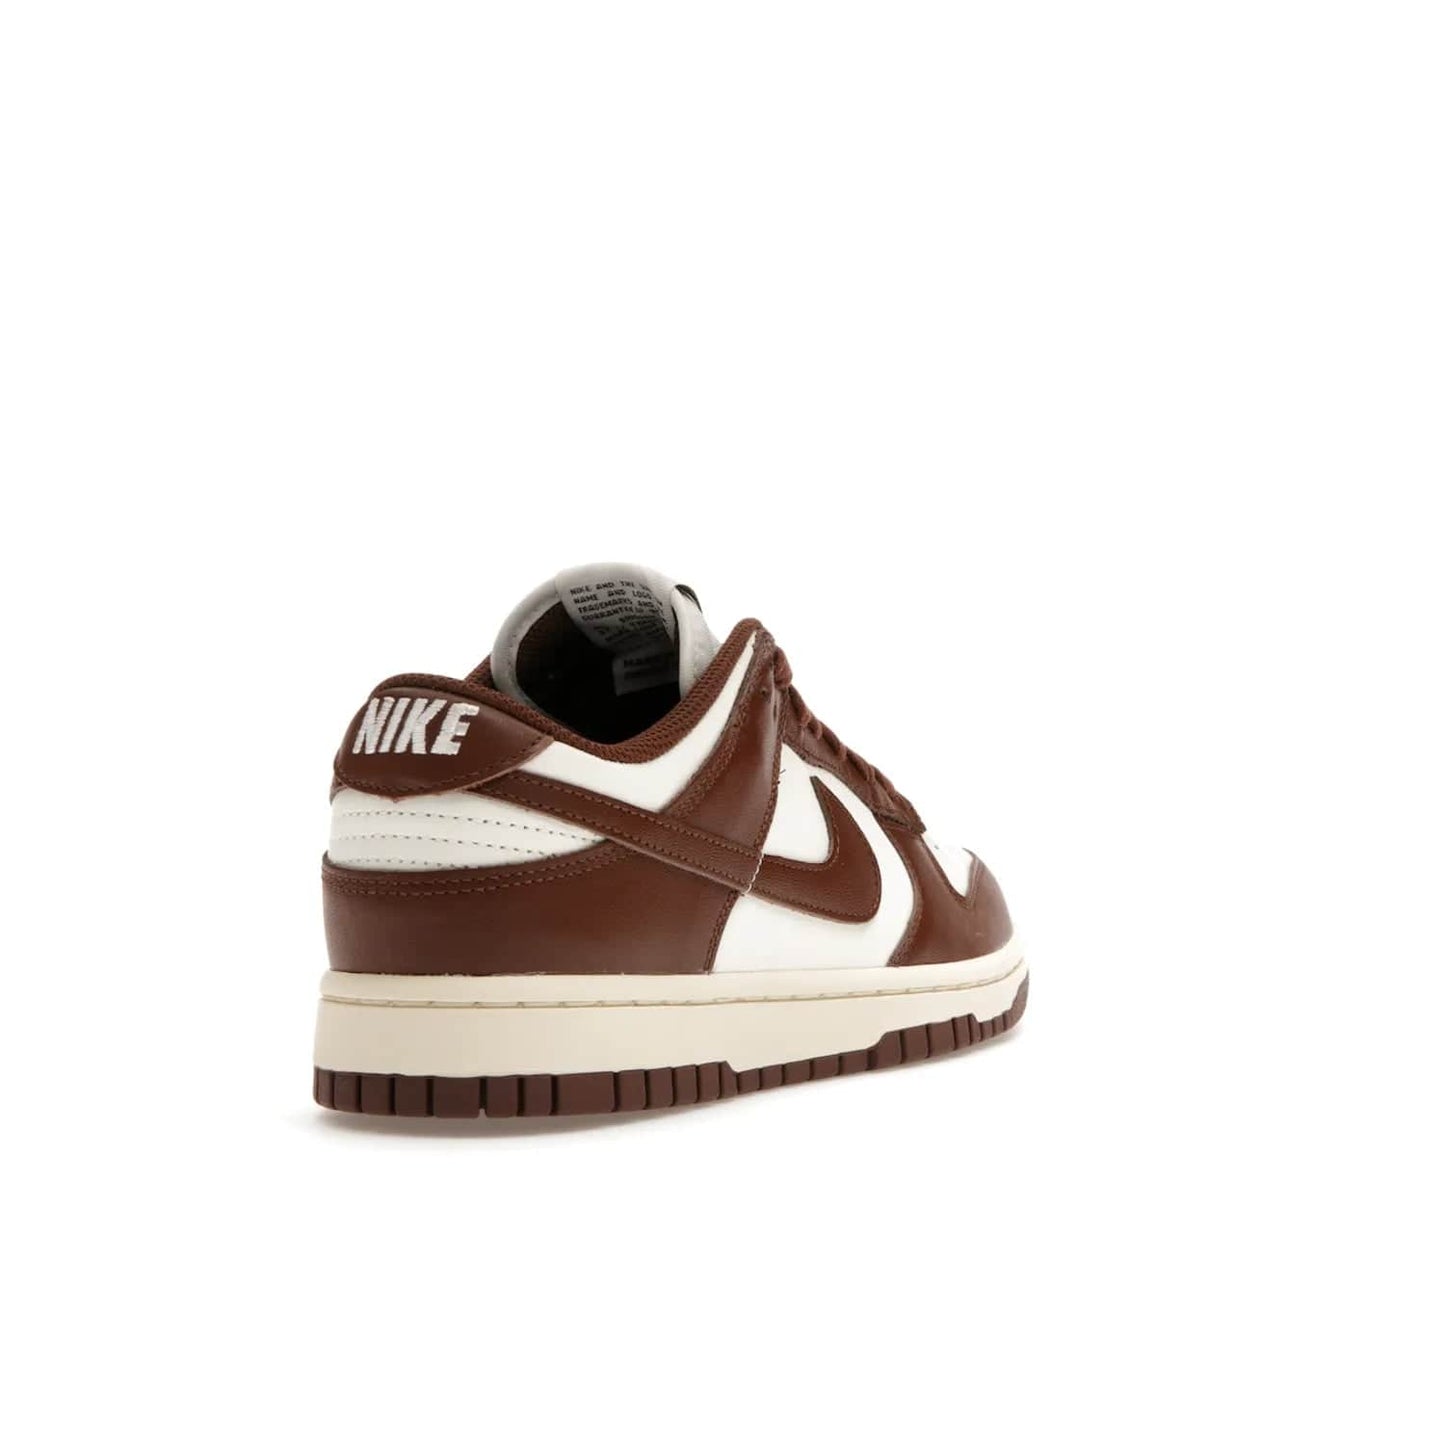 Nike Dunk Low Cacao Wow (Women's) - Image 31 - Only at www.BallersClubKickz.com - Revised
Get the Nike Dunk Low Cacao Wow and make a statement! Plush leather and a cool Cacao Wow finish bring together a unique mix of comfort and fashion that will turn heads. Boosted with a Coconut Milk hue. Shop today.